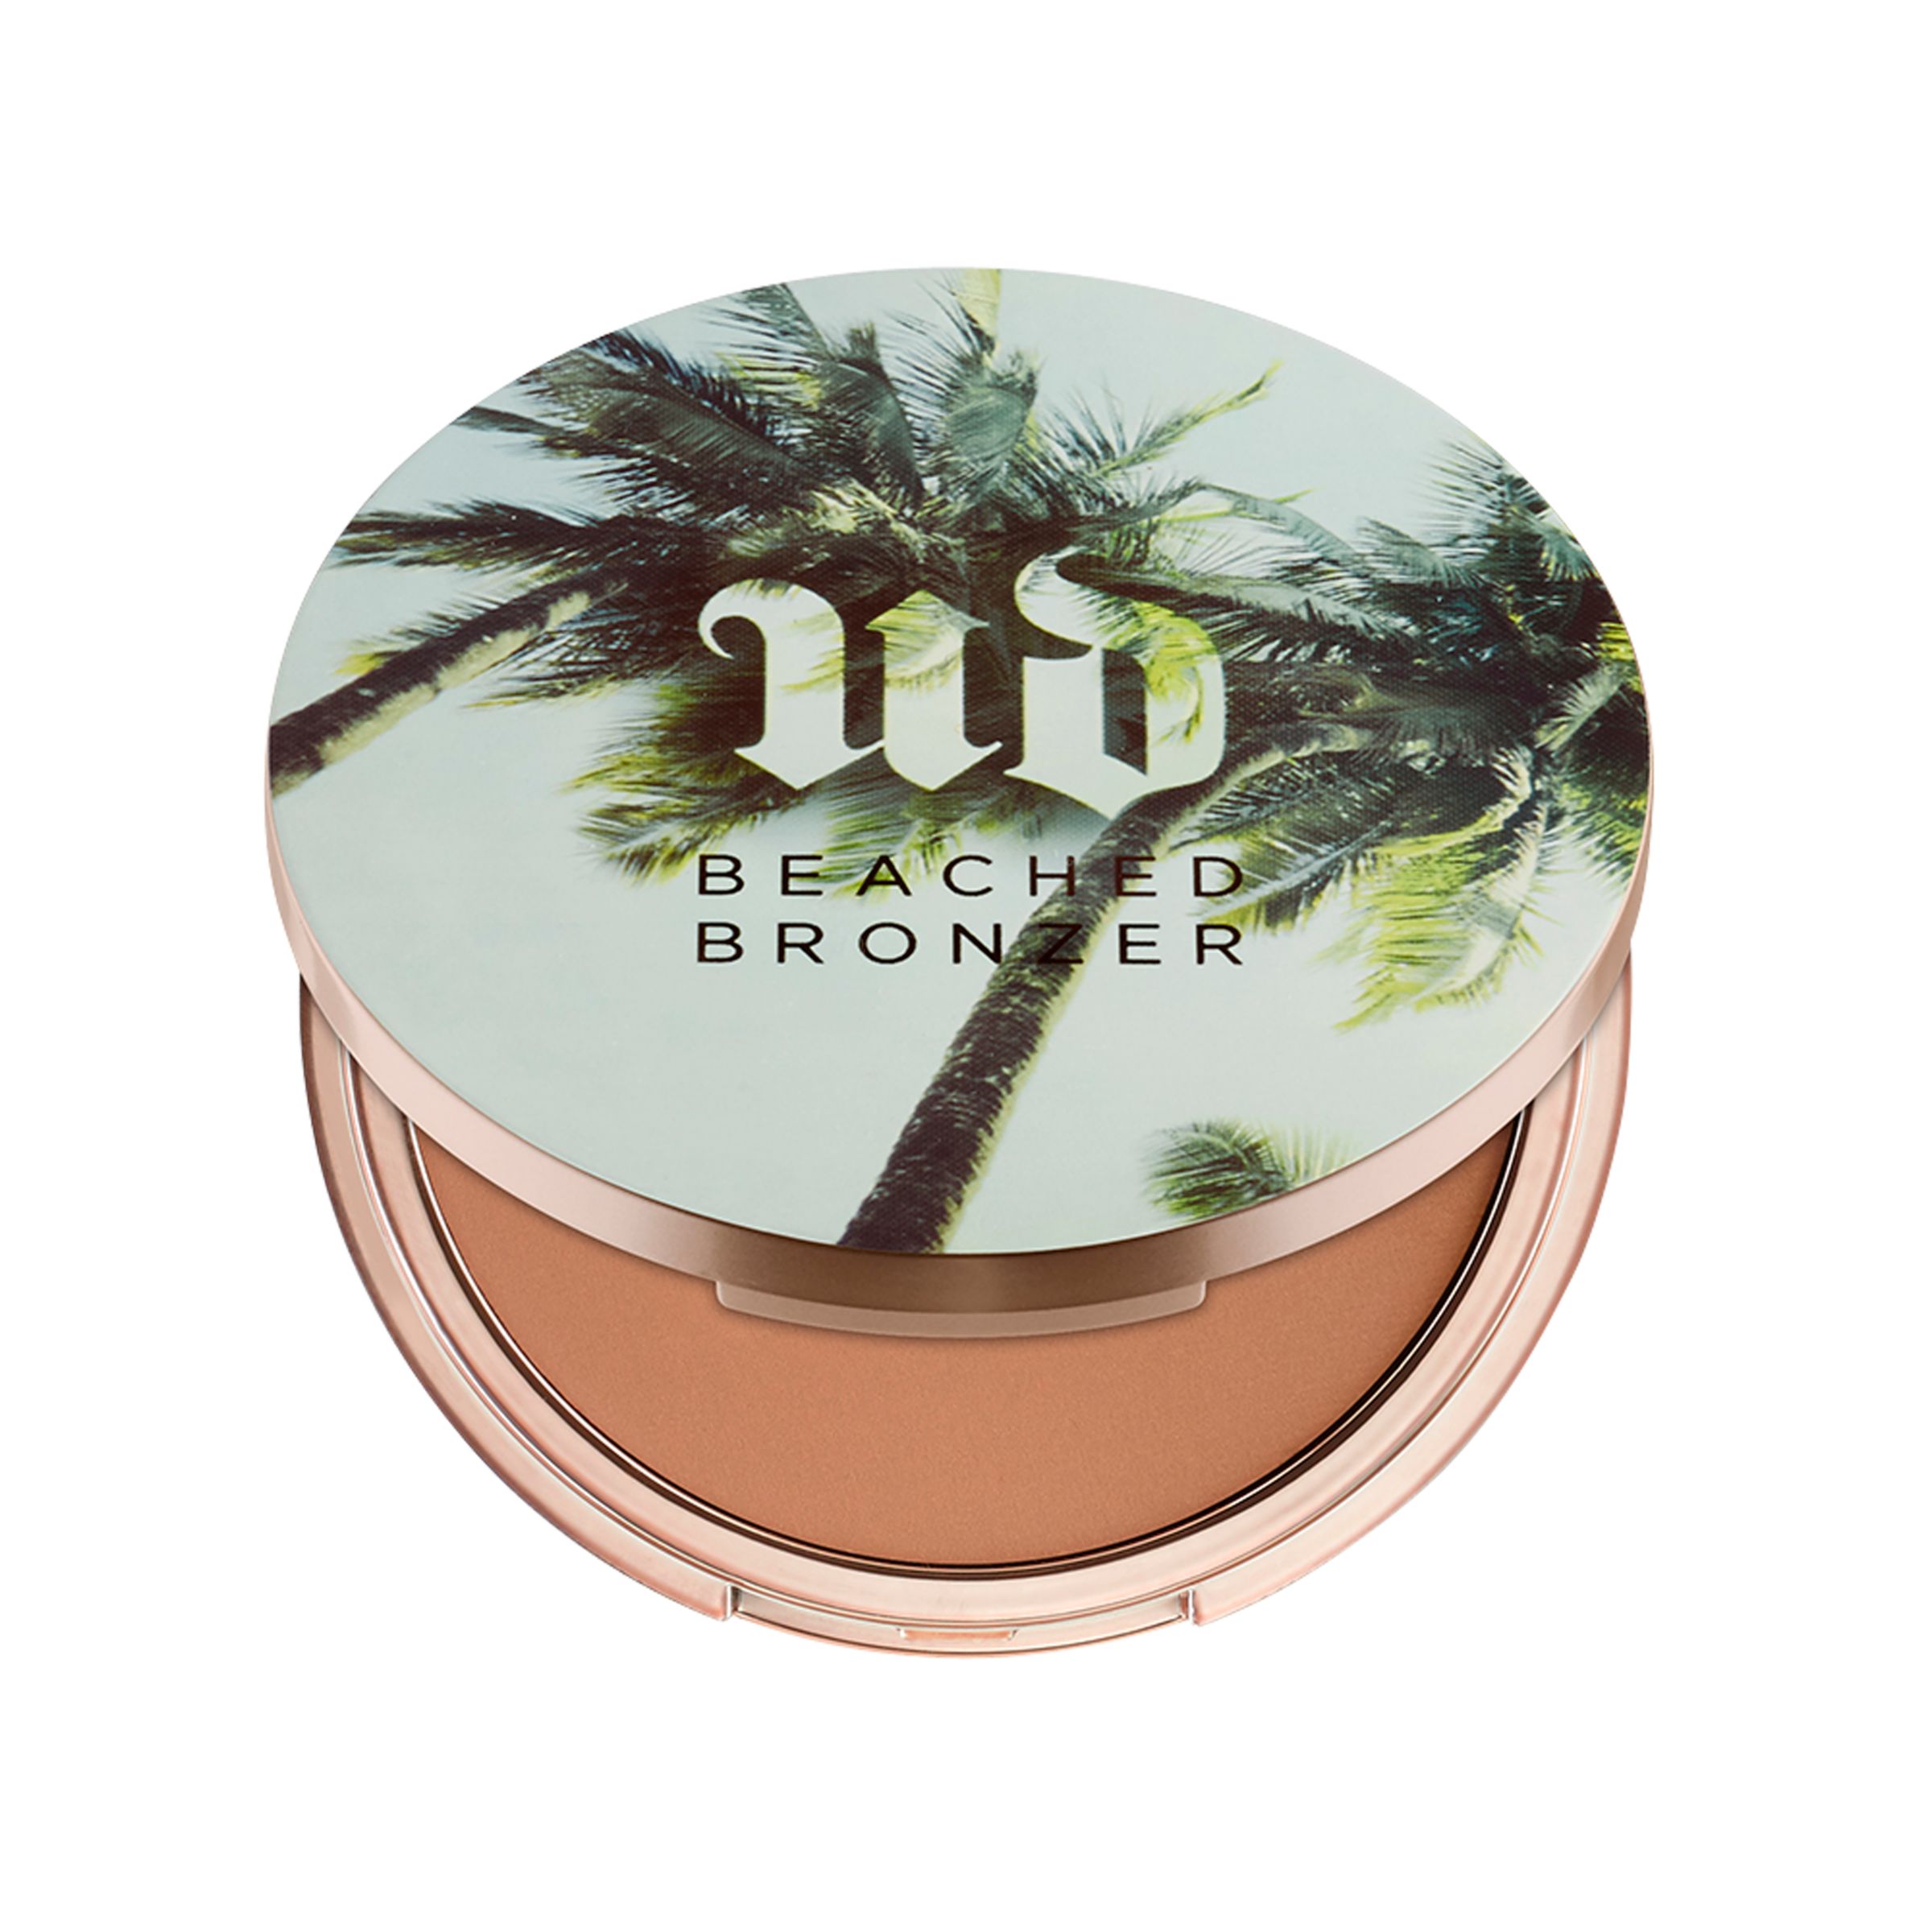 Urban Decay Beached Bronzer, Sun Kissed 1